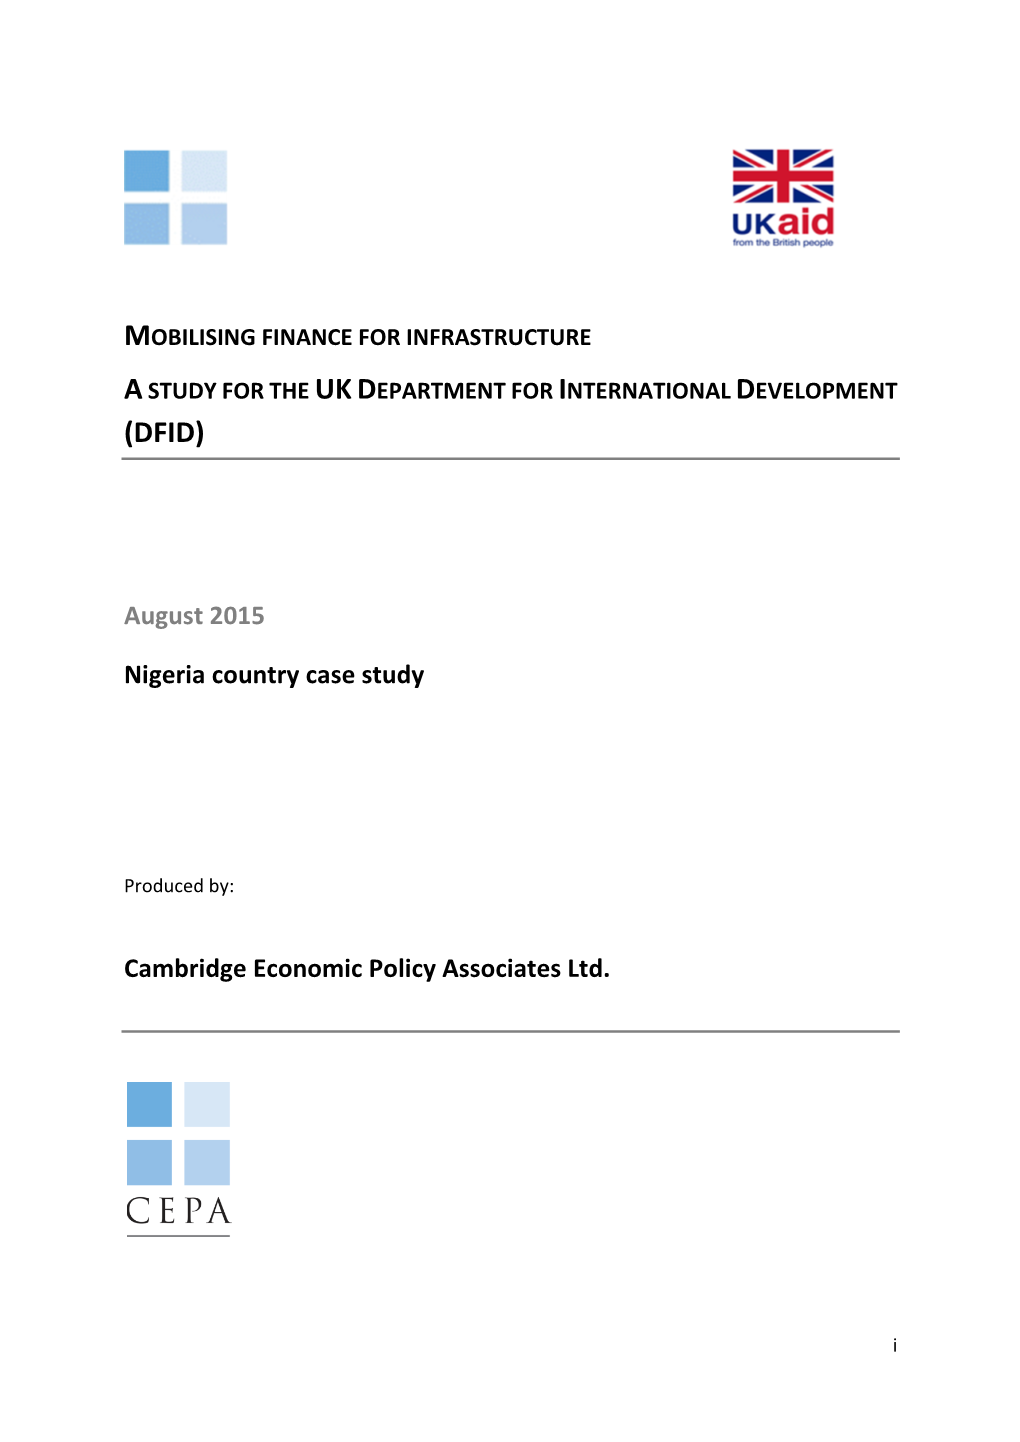 Mobilising Finance for Infrastructure Astudy for the Ukdepartment for International Development